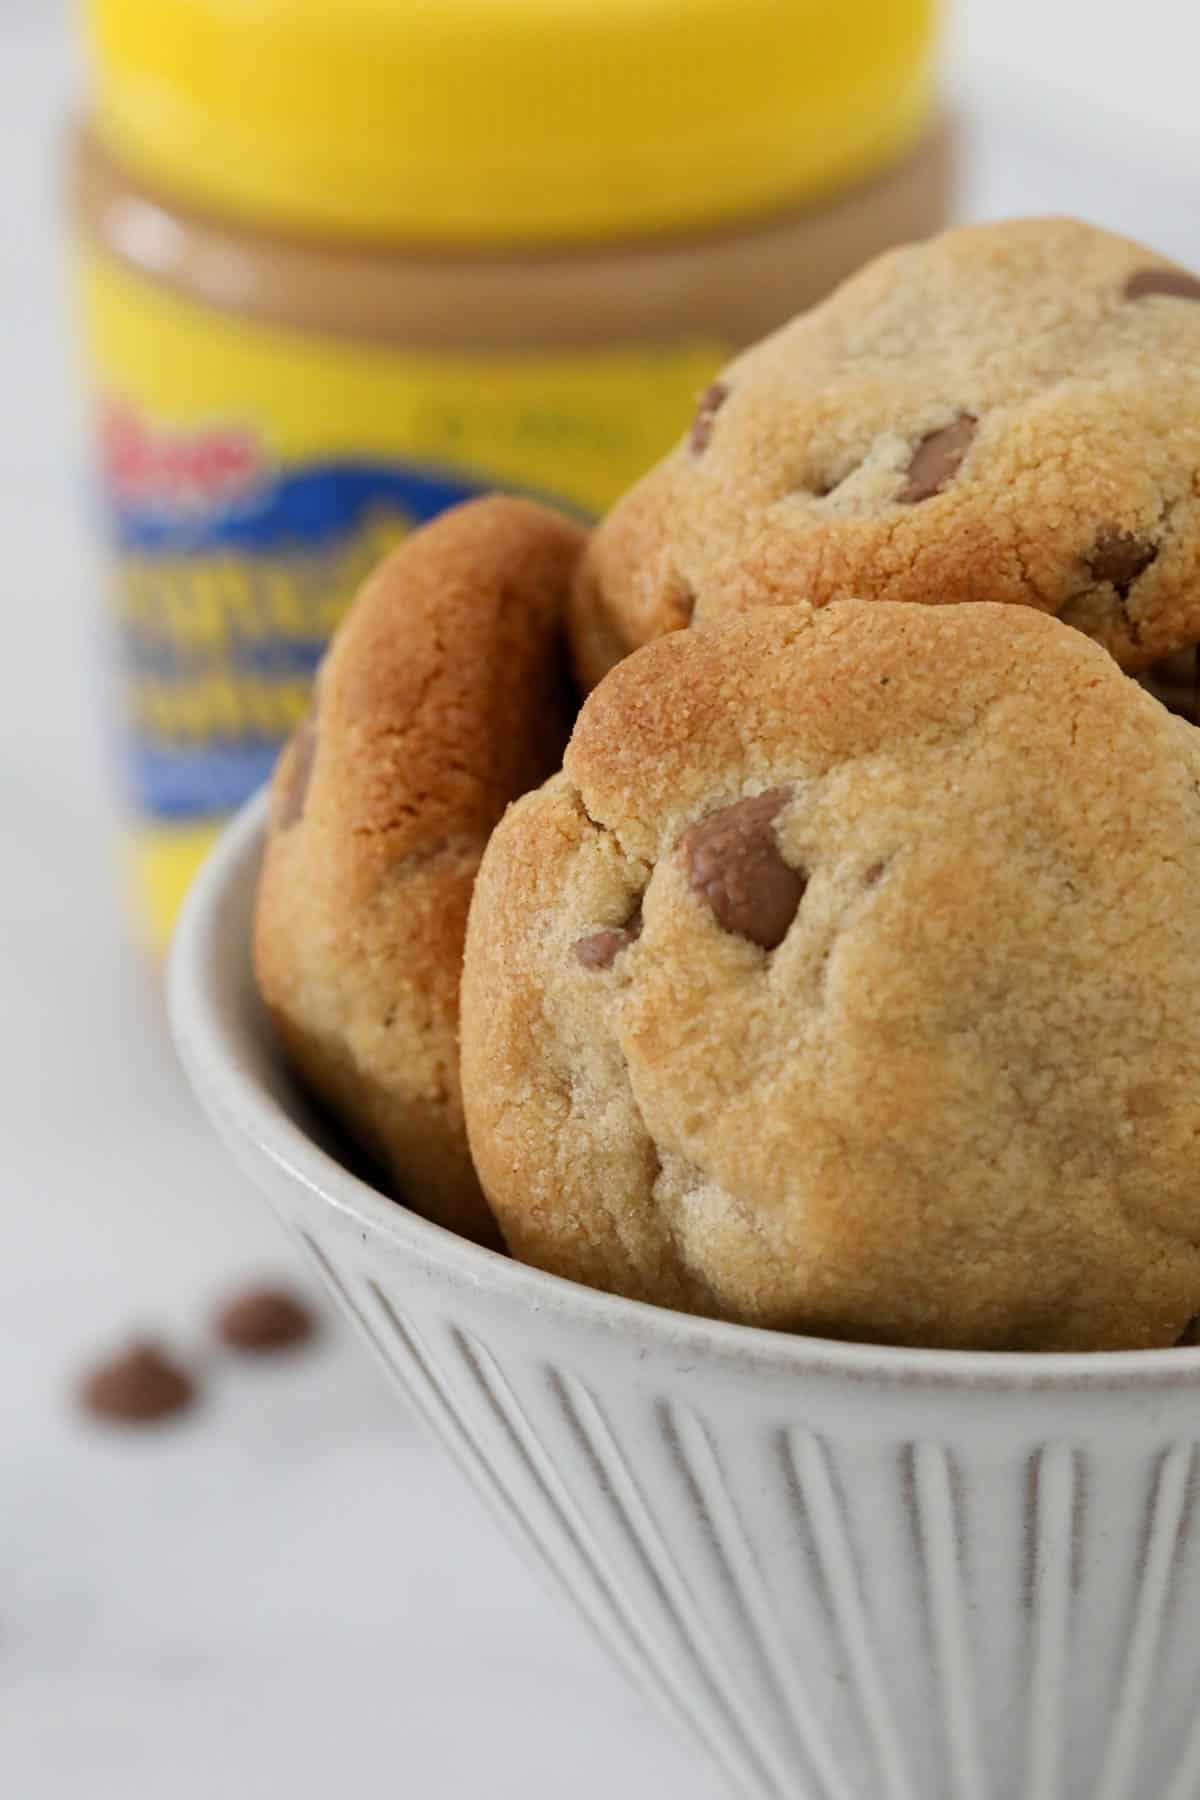 Chocolate chip peanut butter cookies in a bowl, with a jar of peanut butter just visible behind.